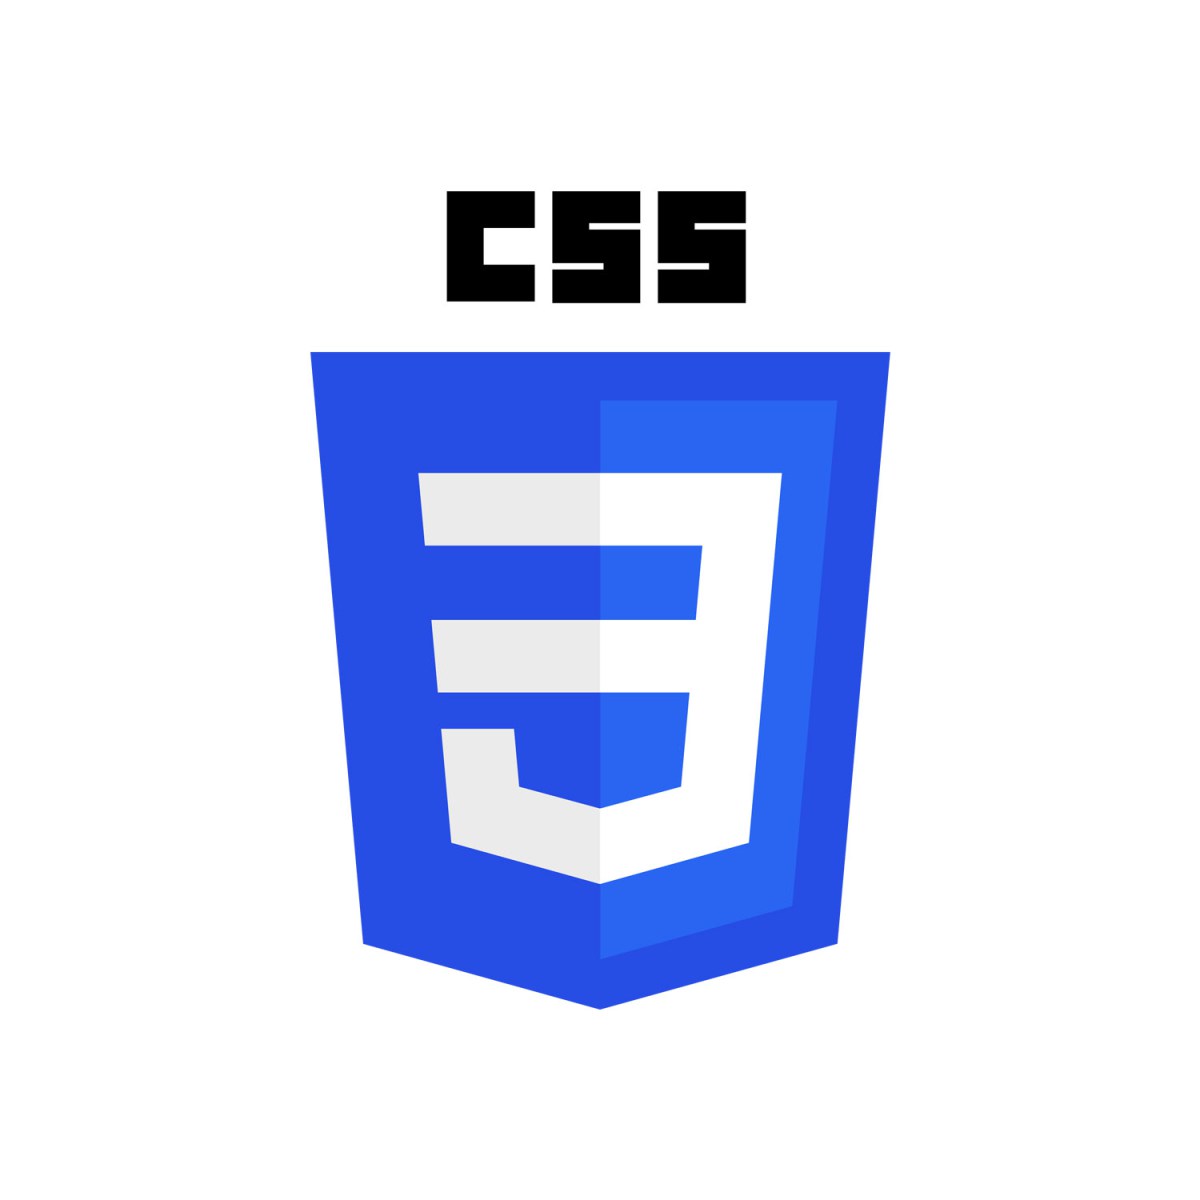 Dalya Kandil can code stylesheets, animations and frameworks using CSS3.